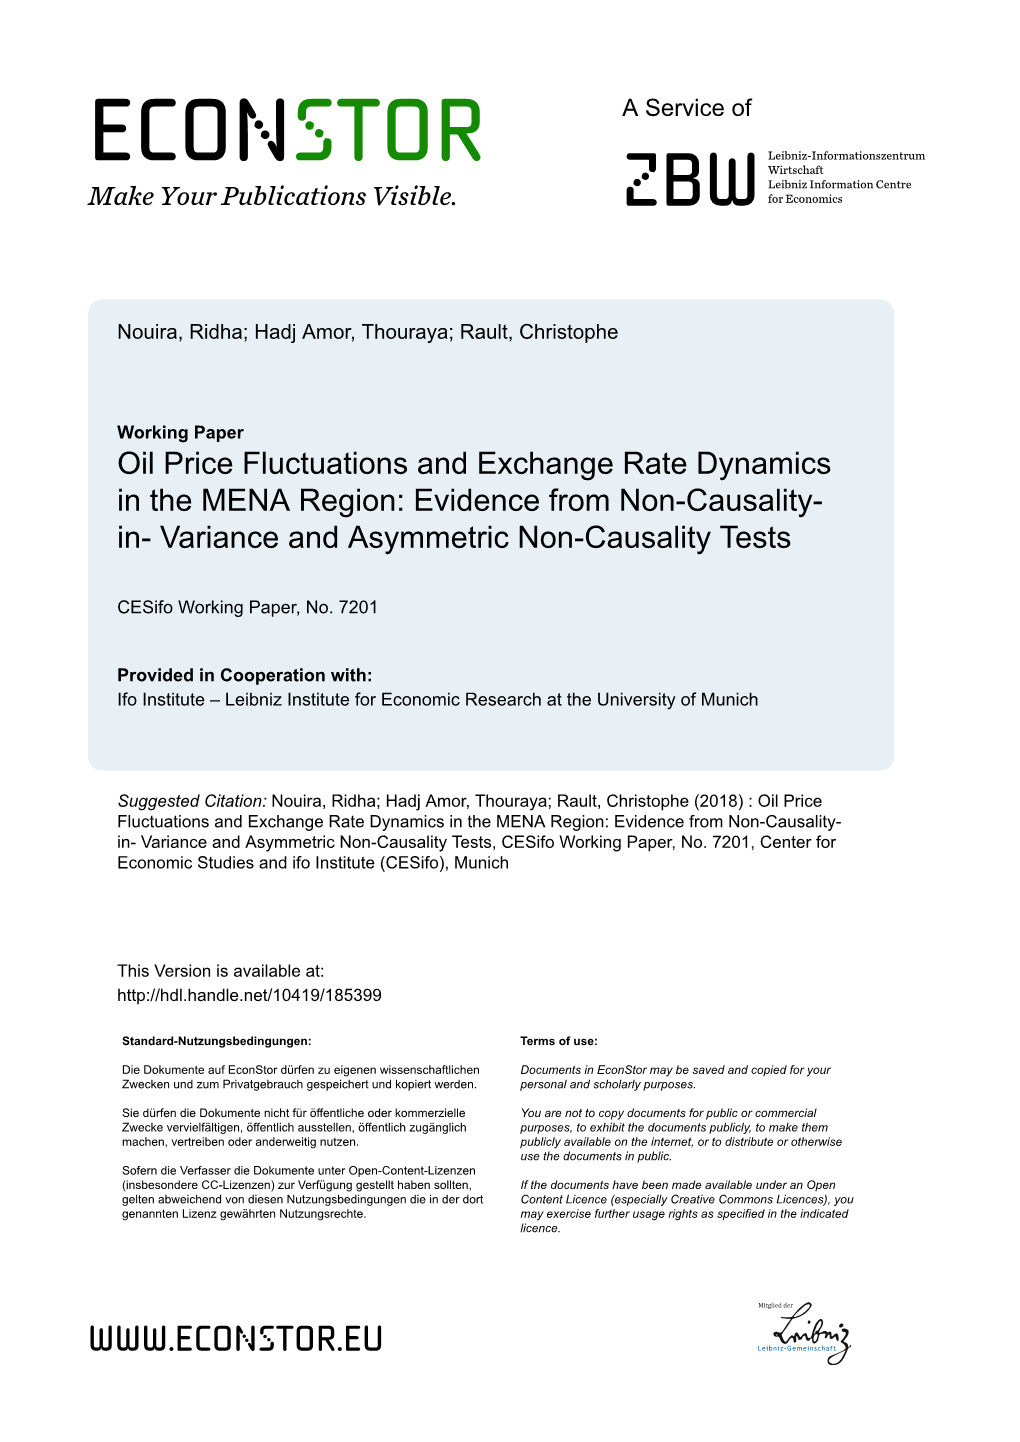 Oil Price Fluctuations and Exchange Rate Dynamics in the MENA Region: Evidence from Non-Causality- In- Variance and Asymmetric Non-Causality Tests